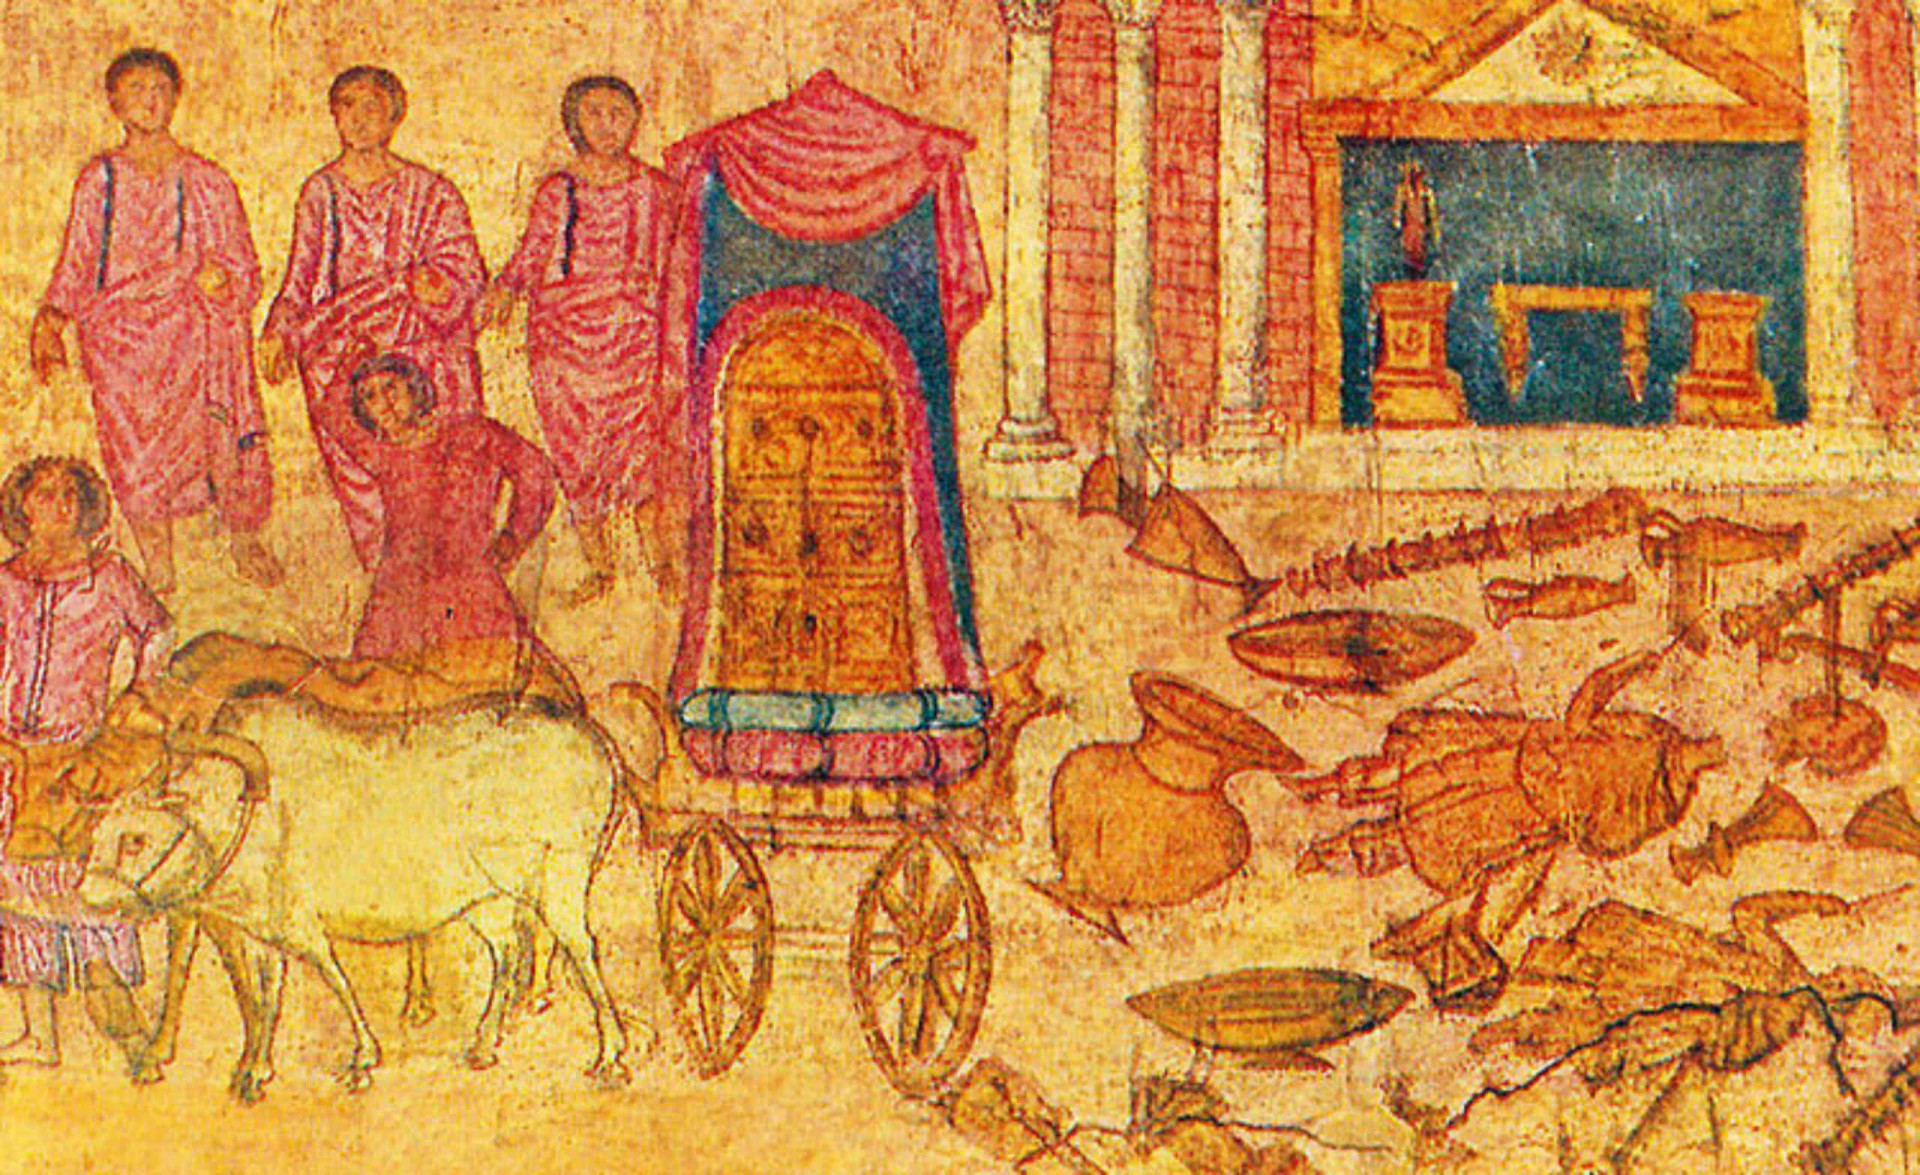 <p>According to the biblical narrative, the Ark was taken onto the battlefield at Eben-Ezer where the Israelites were defeated by the Philistines. The Ark's guardians, Hophni and Phinehas, perished and the precious chest ended up in the possession of the victors. Pictured is a fresco of the Philistine captivity of the Ark, in the Dura-Europos synagogue in Syria. Sadly, the site appears to have been destroyed by Daesh during the present-day Syrian civil war.</p><p><a href="https://www.msn.com/en-ph/community/channel/vid-7xx8mnucu55yw63we9va2gwr7uihbxwc68fxqp25x6tg4ftibpra?cvid=94631541bc0f4f89bfd59158d696ad7e">Follow us and access great exclusive content every day</a></p>